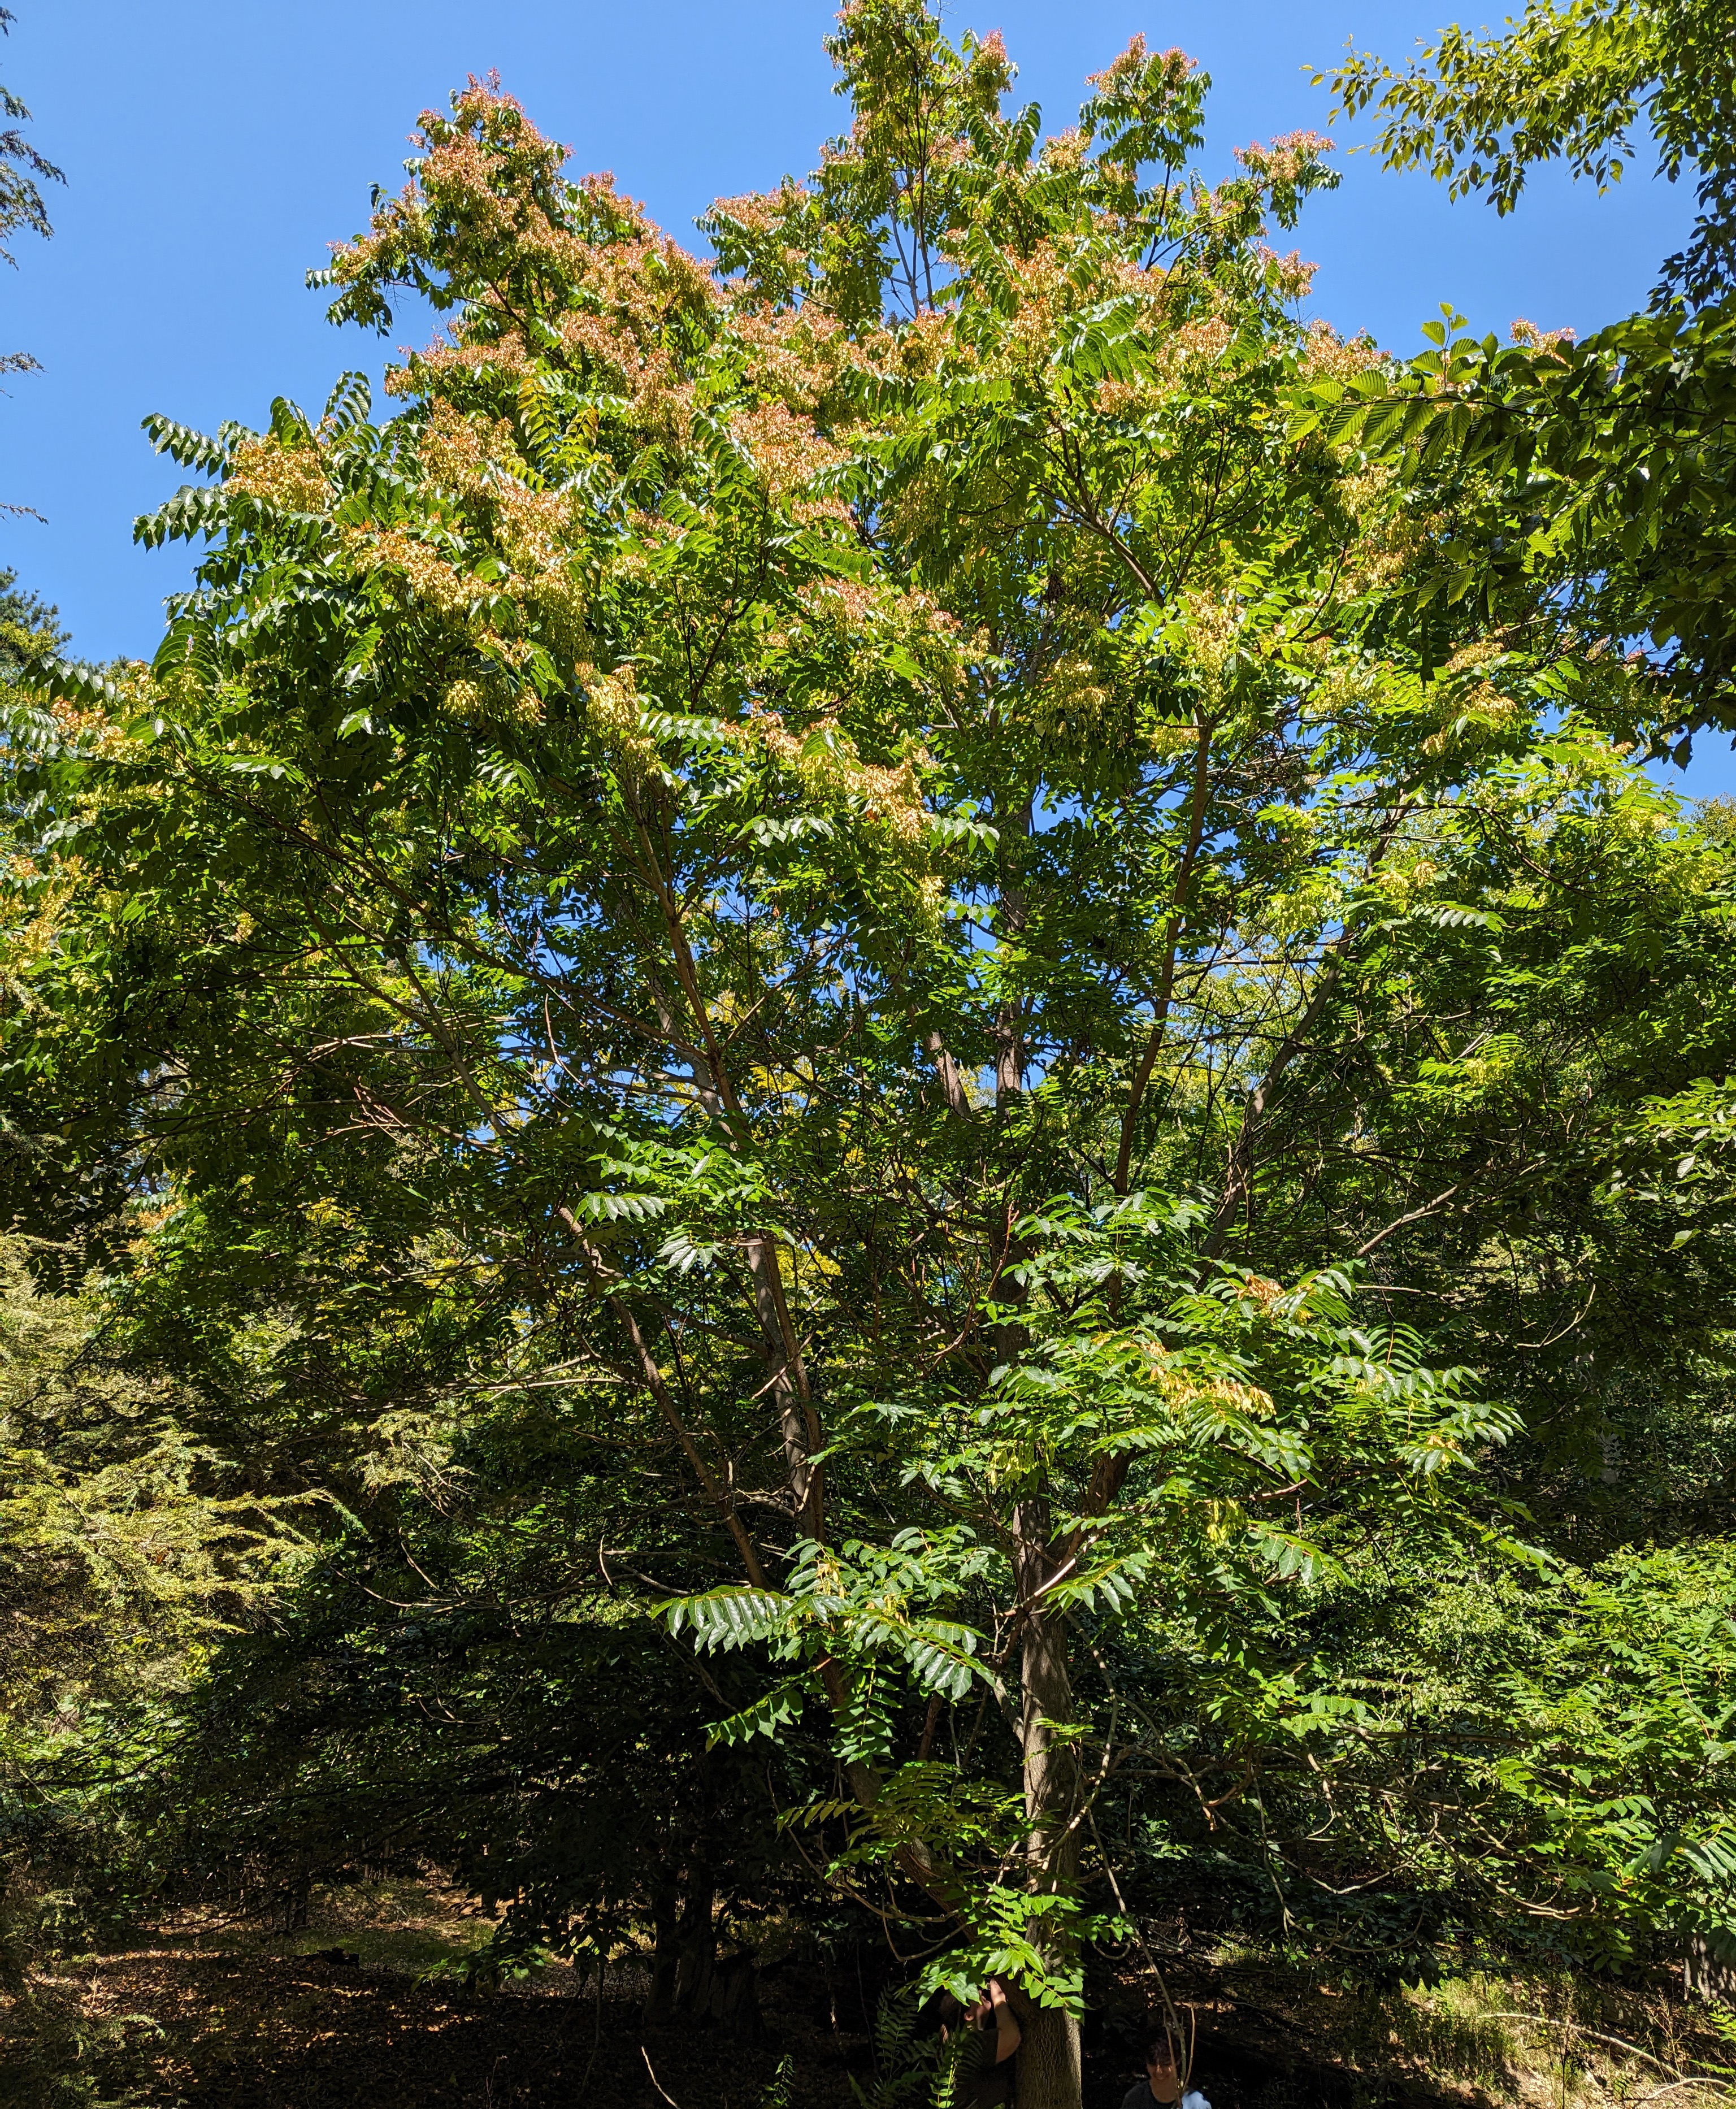 Large and small tree of heaven in a forested area.